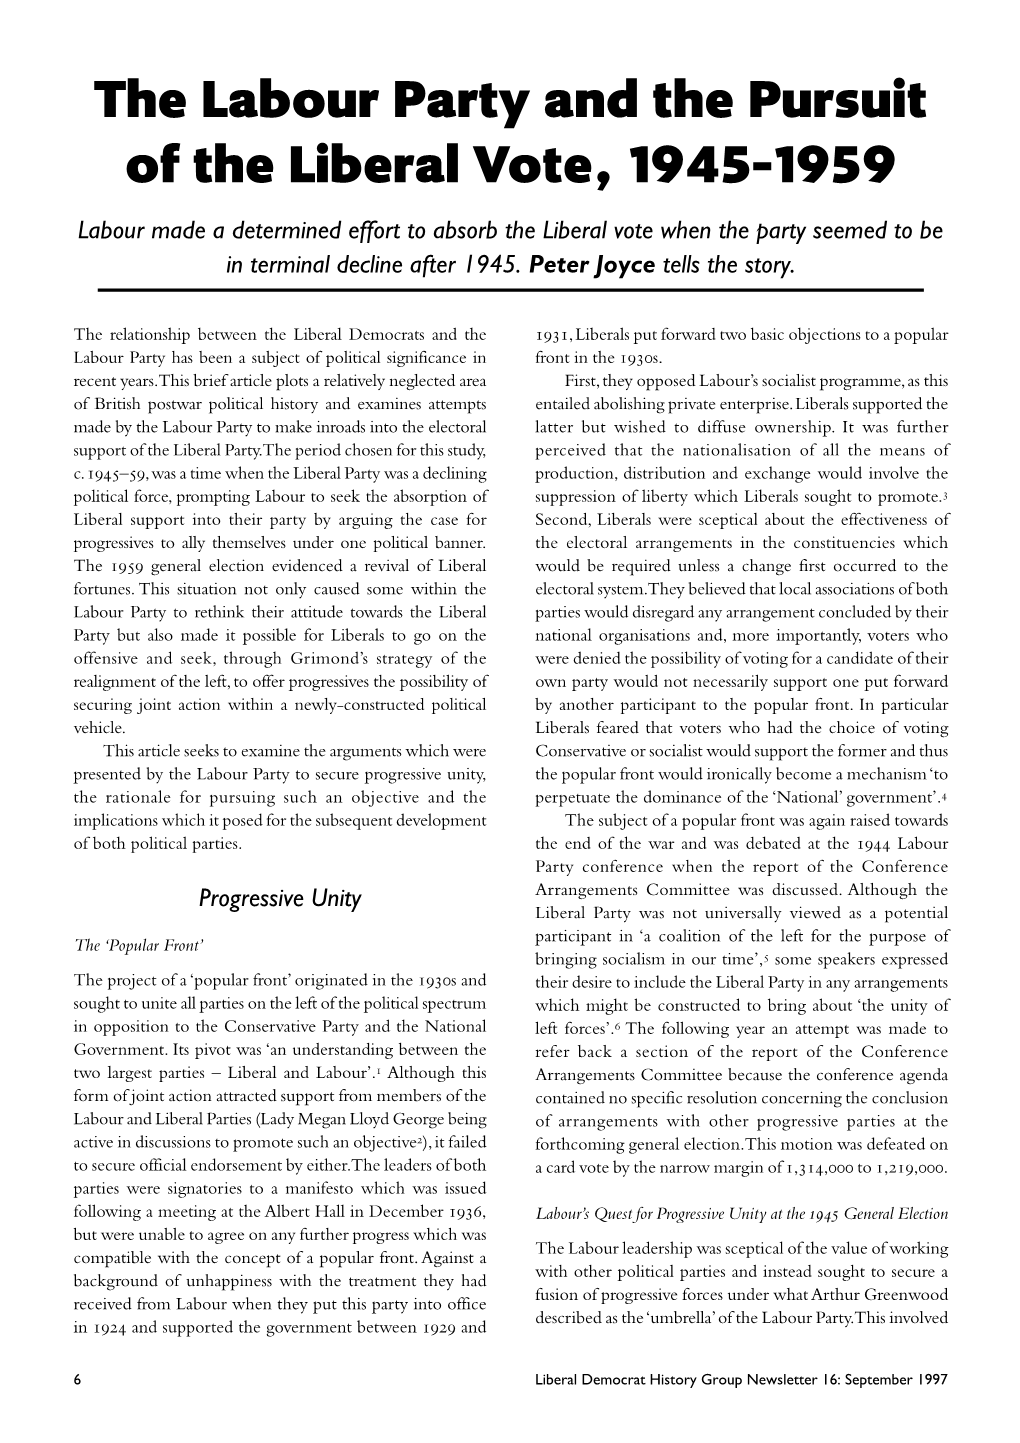 The Labour Party and the Pursuit of the Liberal Vote, 1945–1959